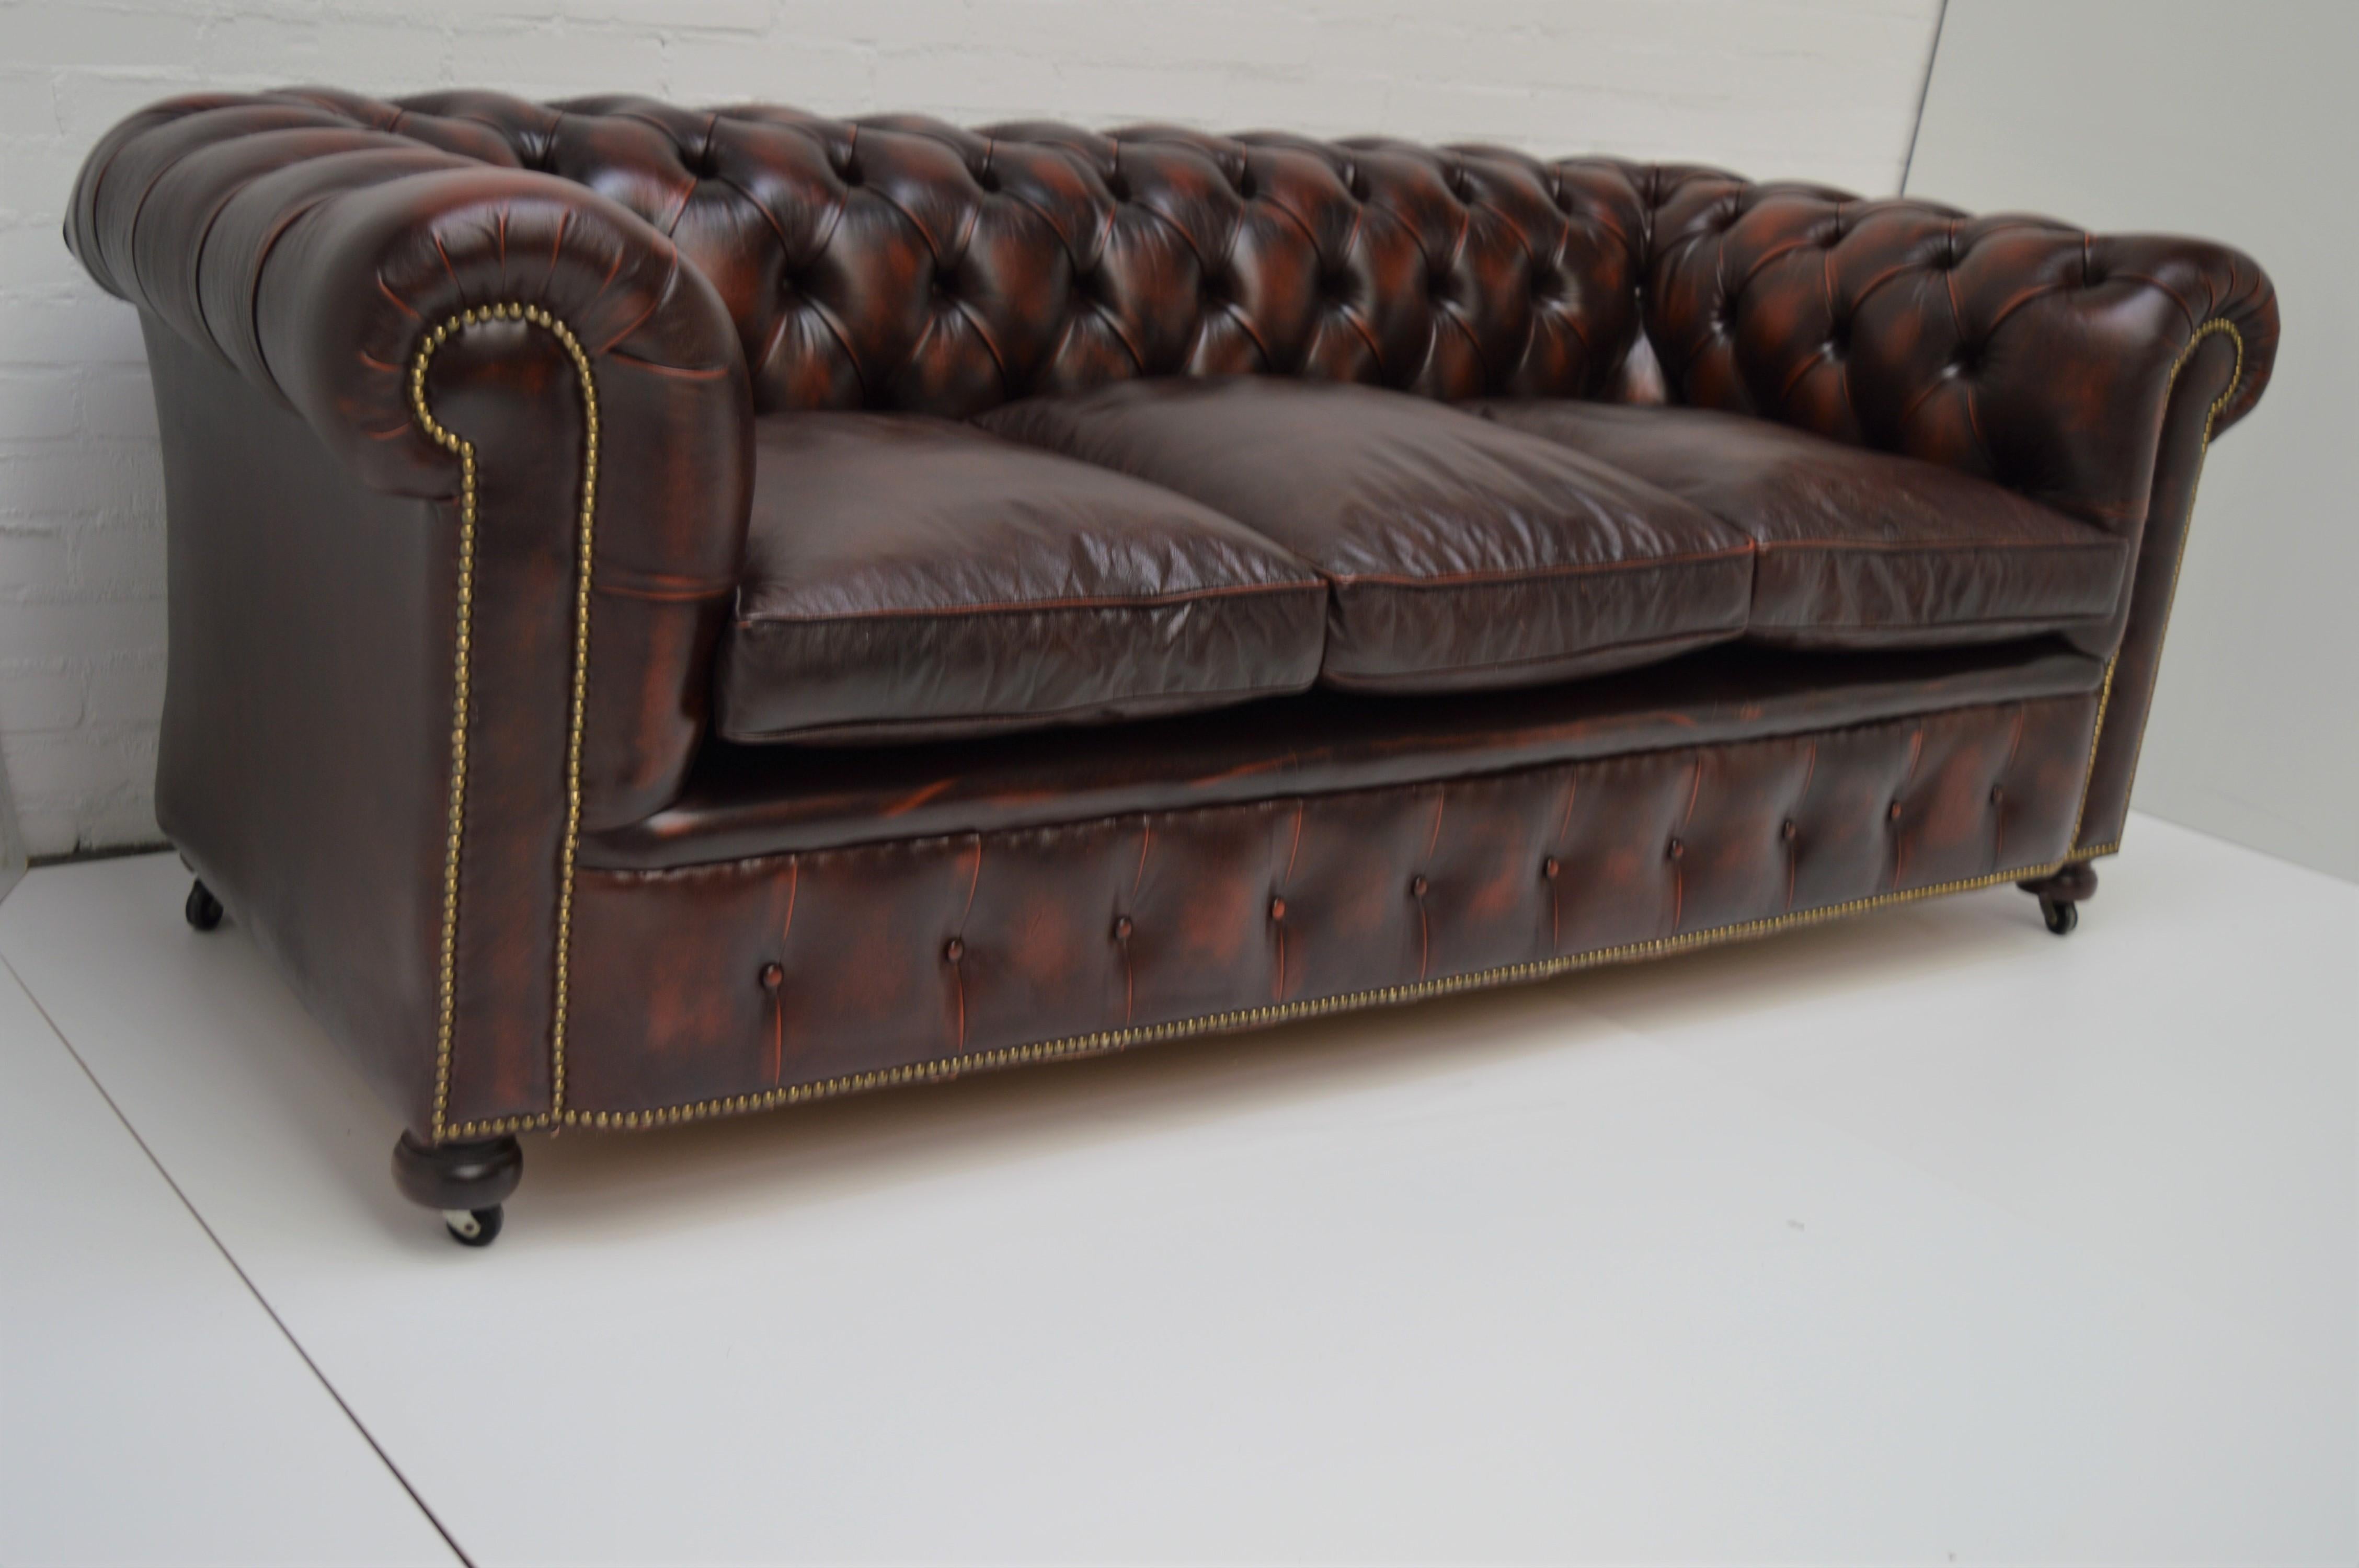 Bery nice authentic antique Tan Chesterfield sofa in very good condition. Heavy, with coil sprung and solid frame. Checked inside out and comes with 3 years of warranty on the frame/sprung/cushions.

For the Classic Chesterfield lovers who like a